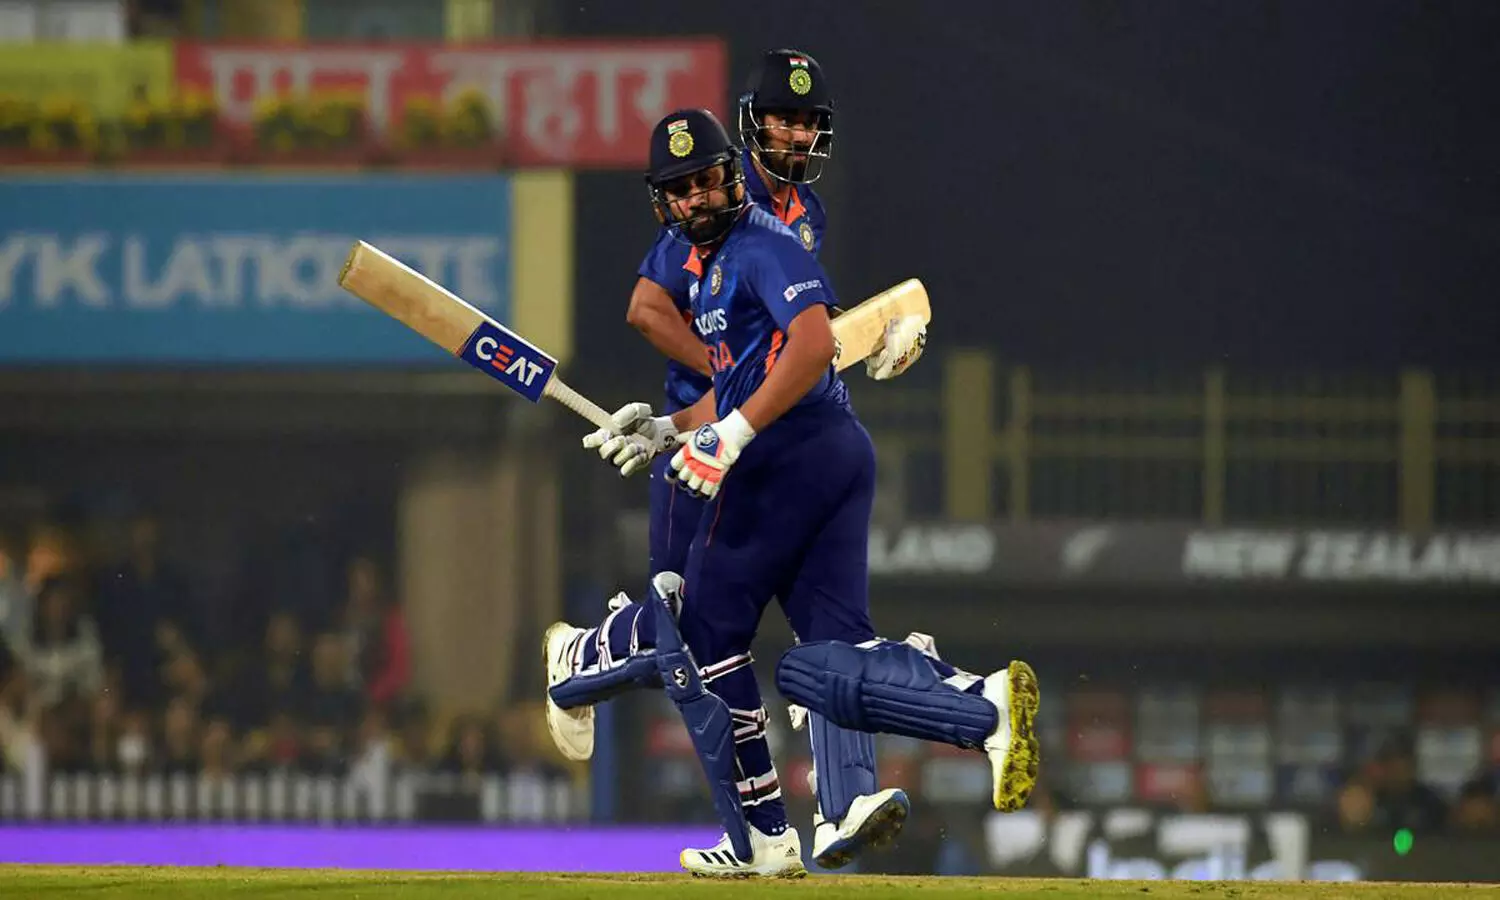 IND vs NZ 2nd T20I: India beat New Zealand by 7 wickets to seal series